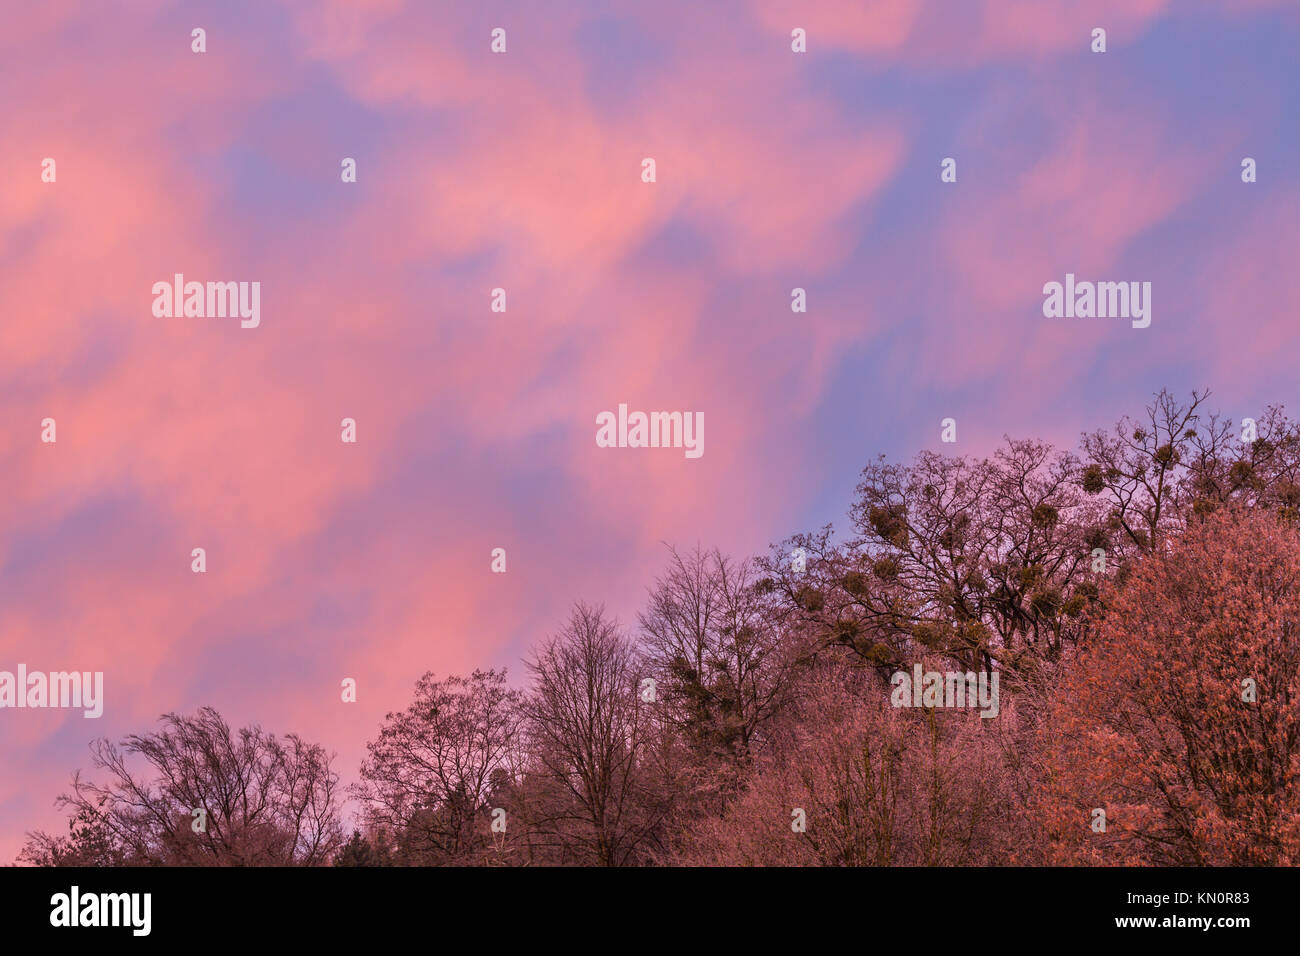 Colorful Sky with Trees in the foreground, Sunrise, Lower Austria, Austria Stock Photo